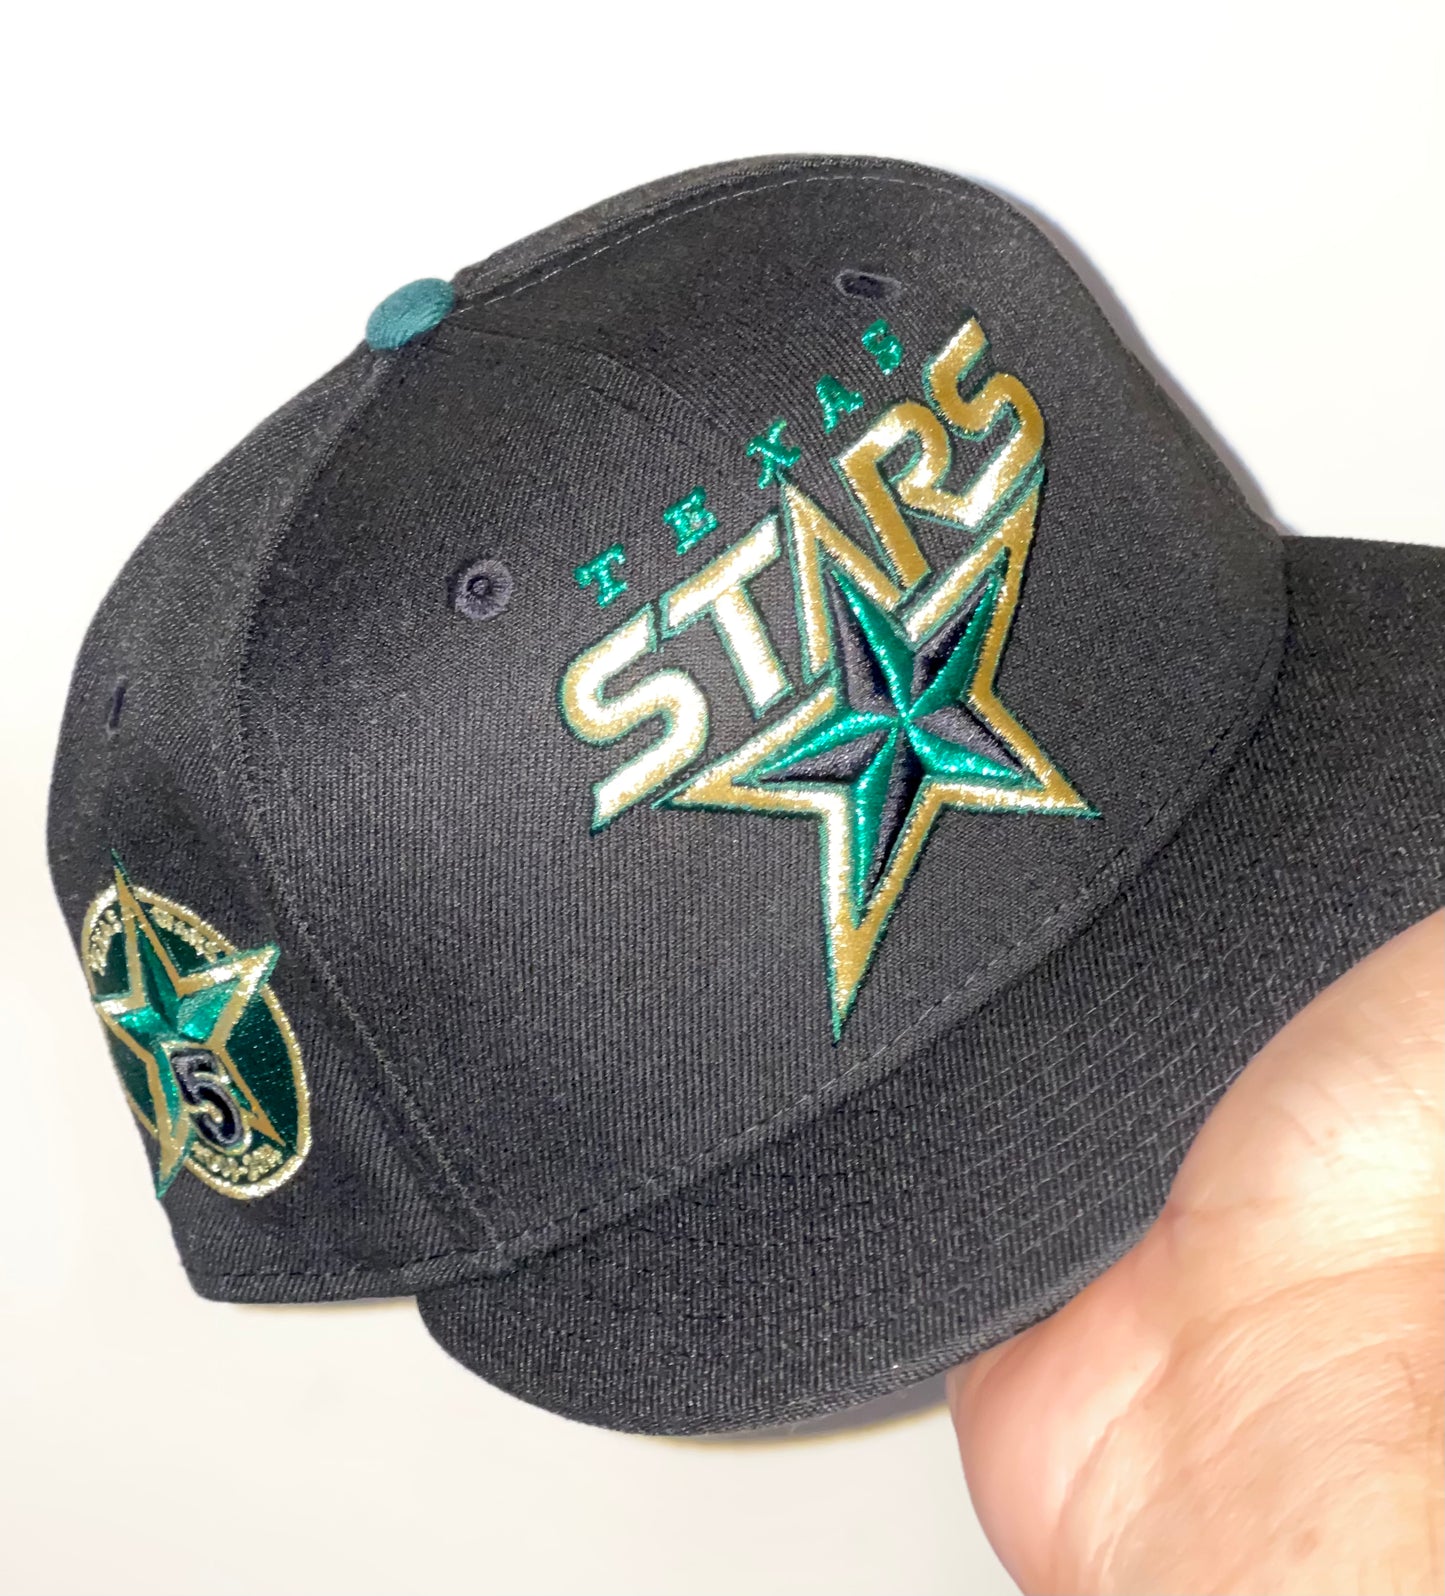 Texas Stars American Hockey League Fitted Hat (Black/Green)